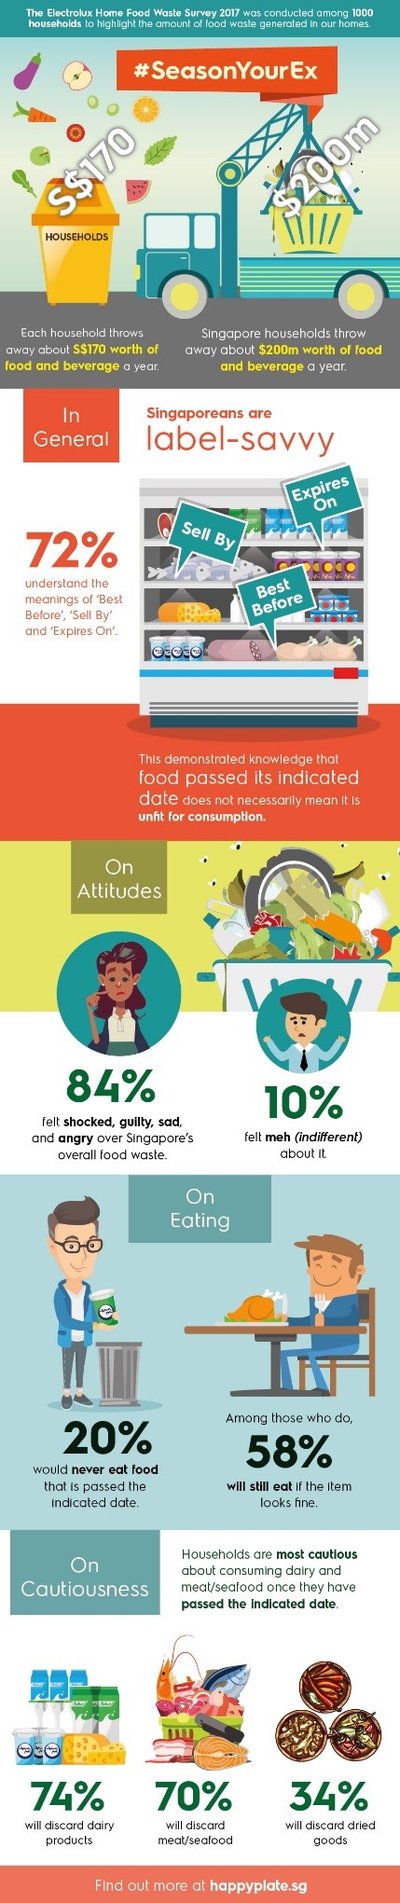 The Electrolux Home Food Waste Survey 2017